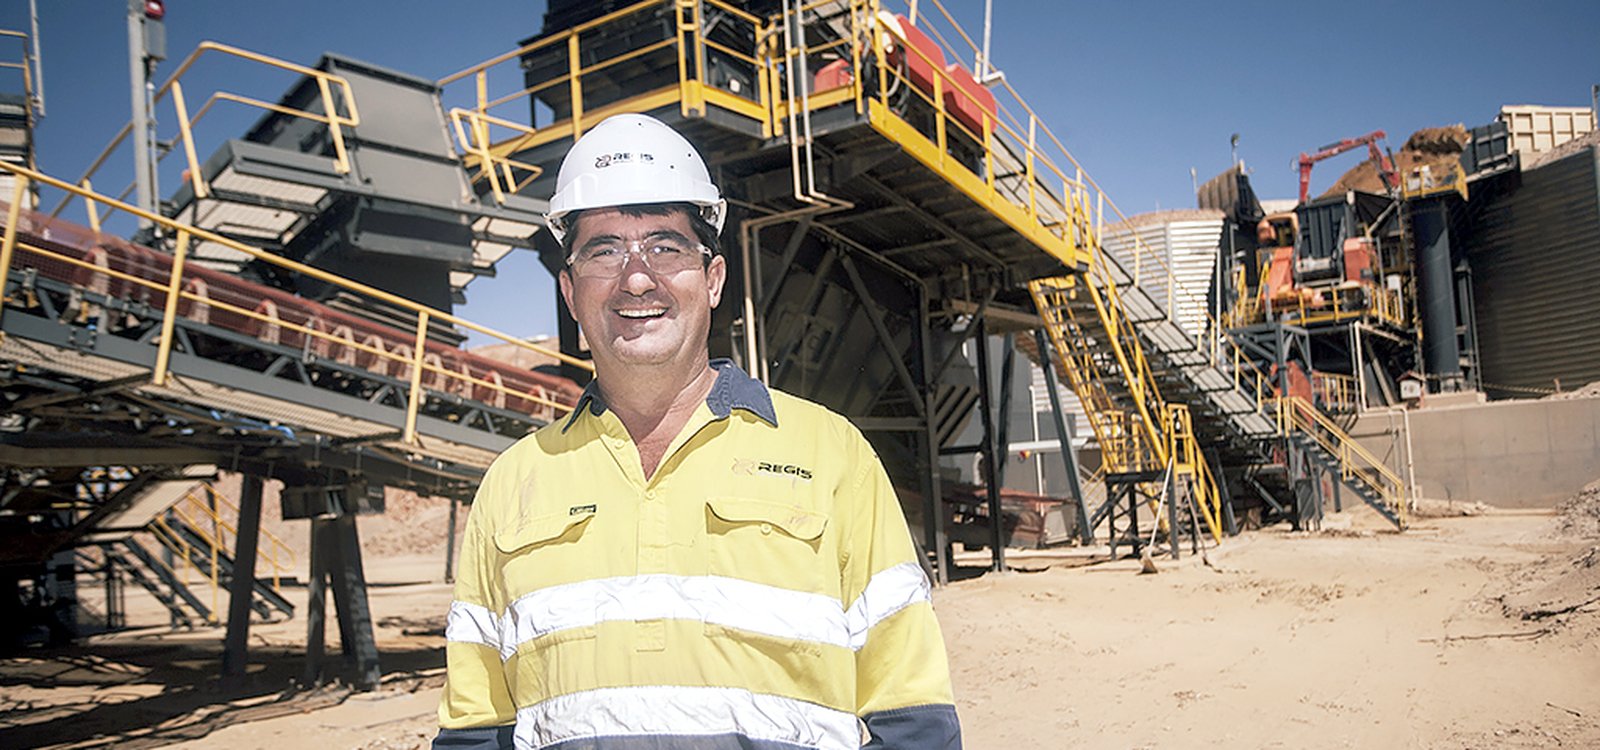 Bernie Cleary, General Manager, Rosemont gold mine, has been in the mining industry for 12 years.